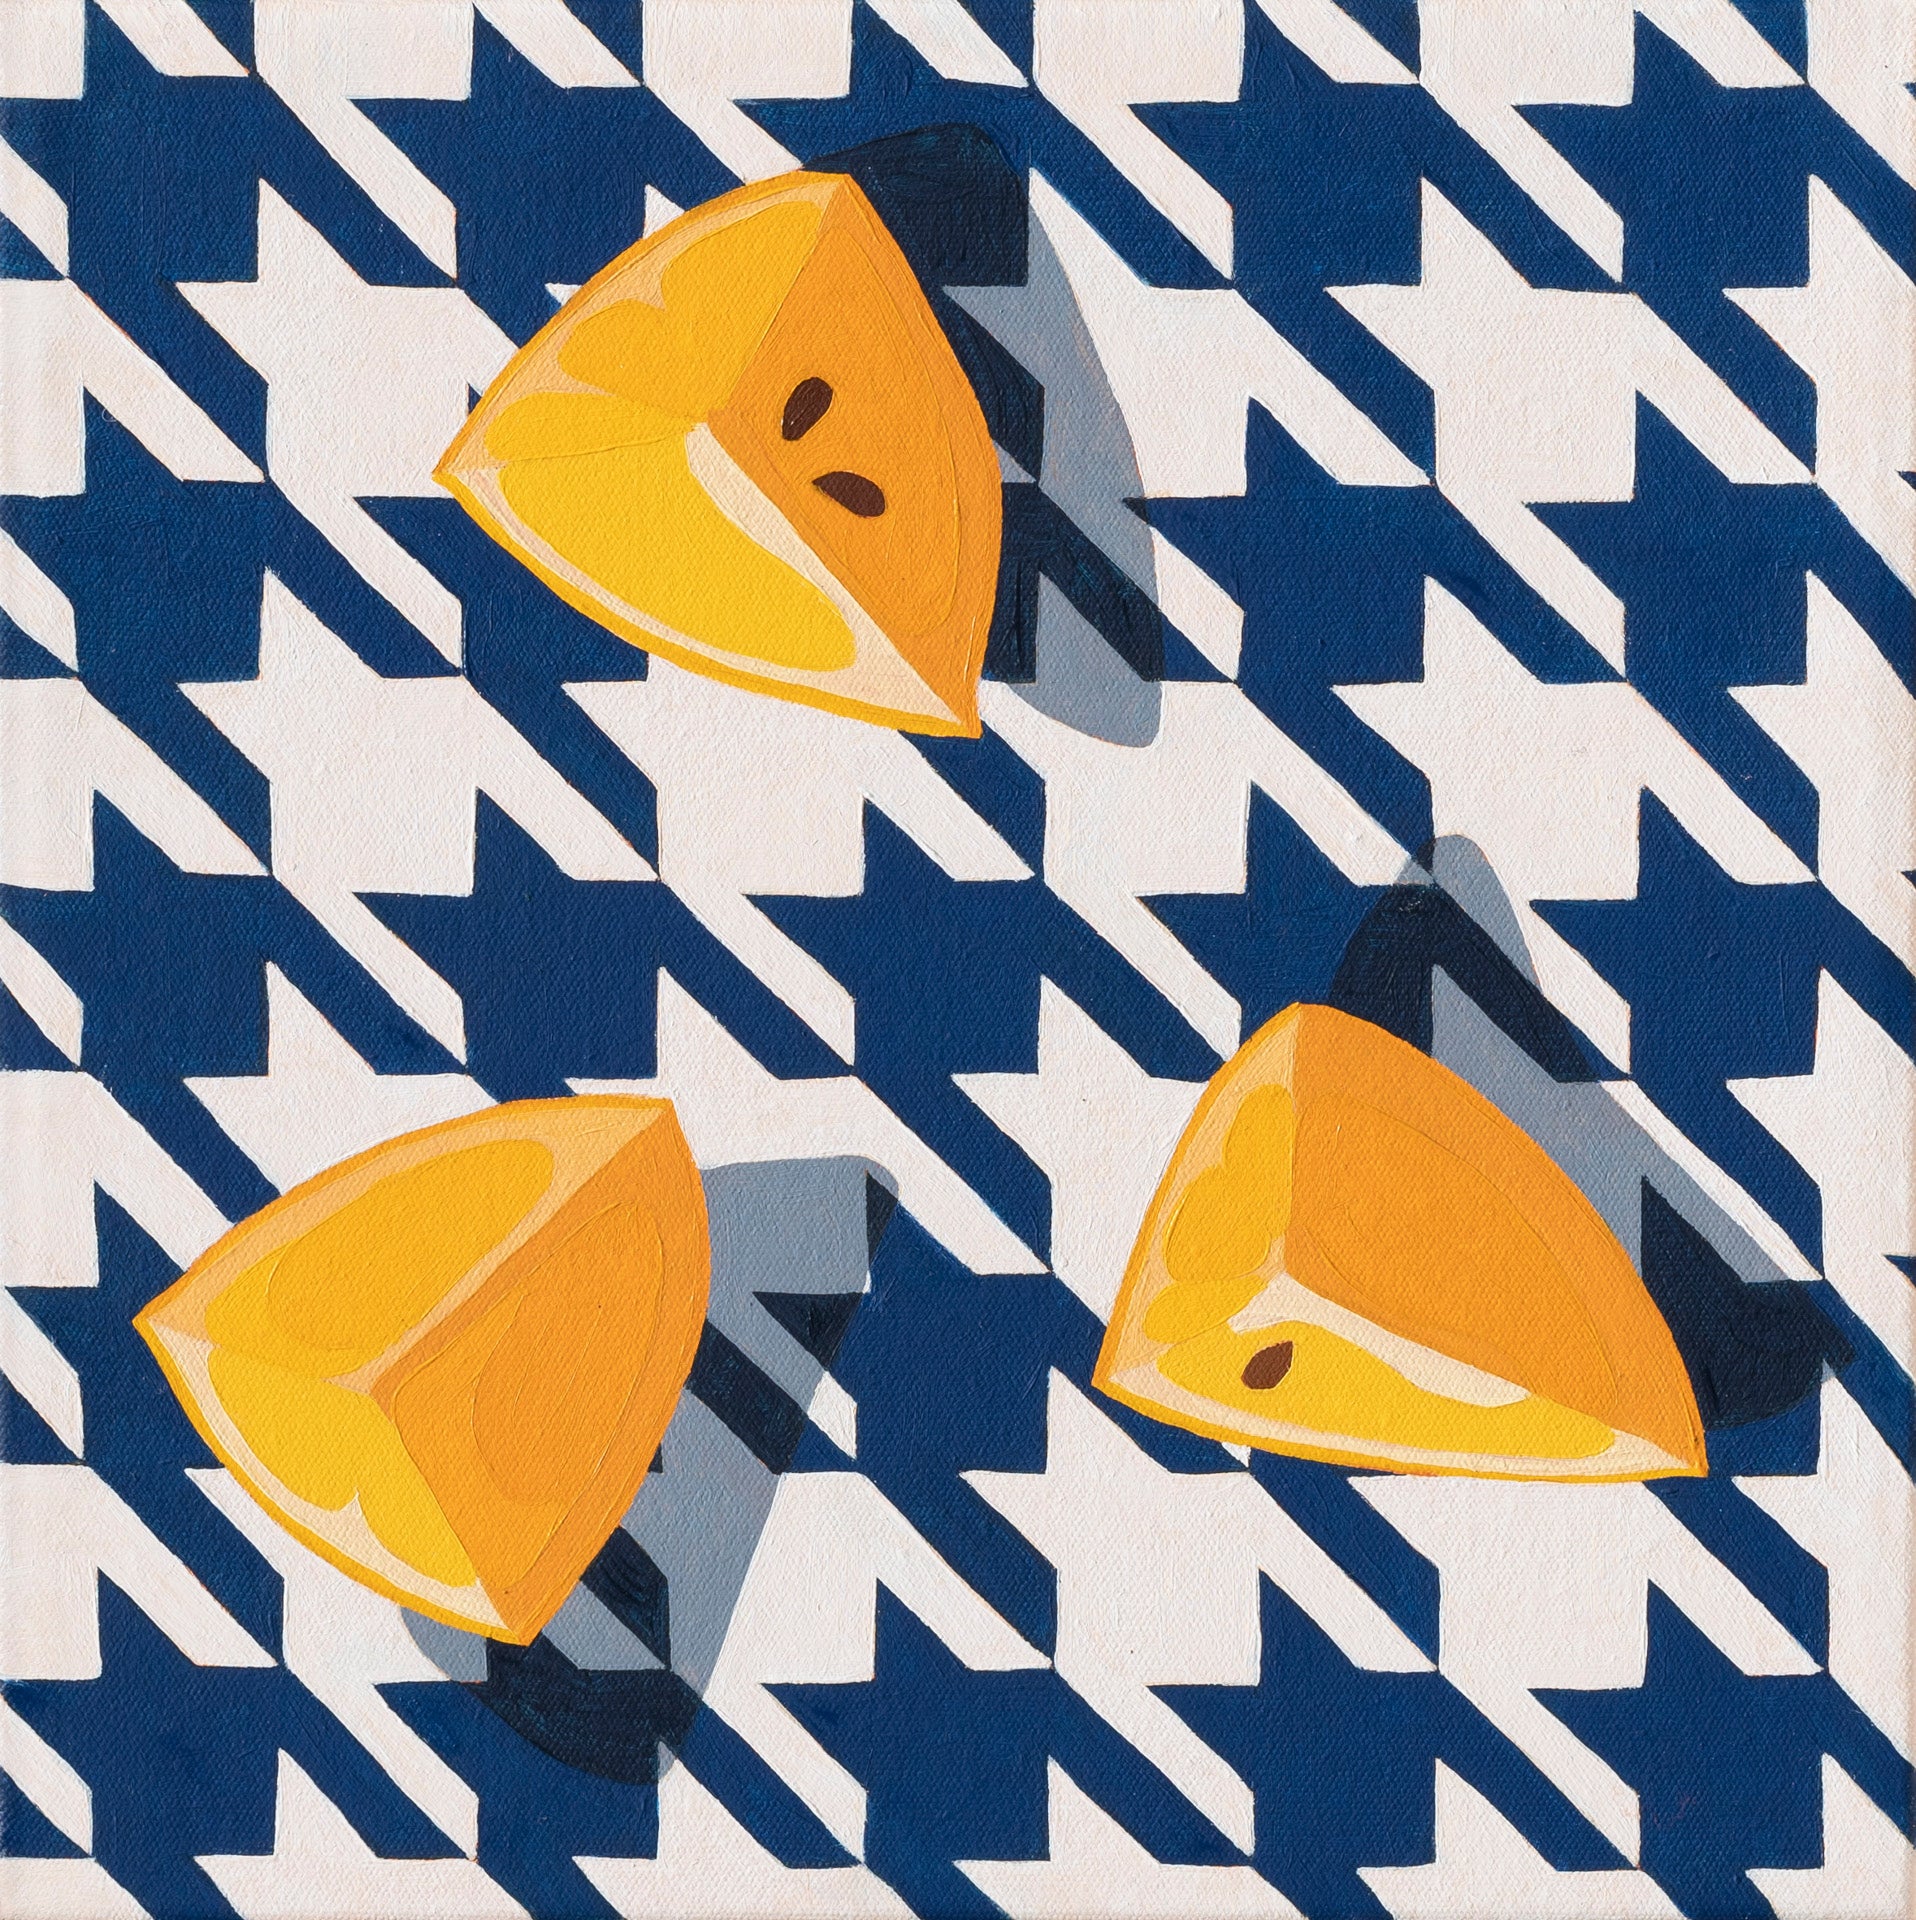 an original oil painting of three wedges of yellow lemons on a navy blue and white houndstooth background with blue-grey shadows